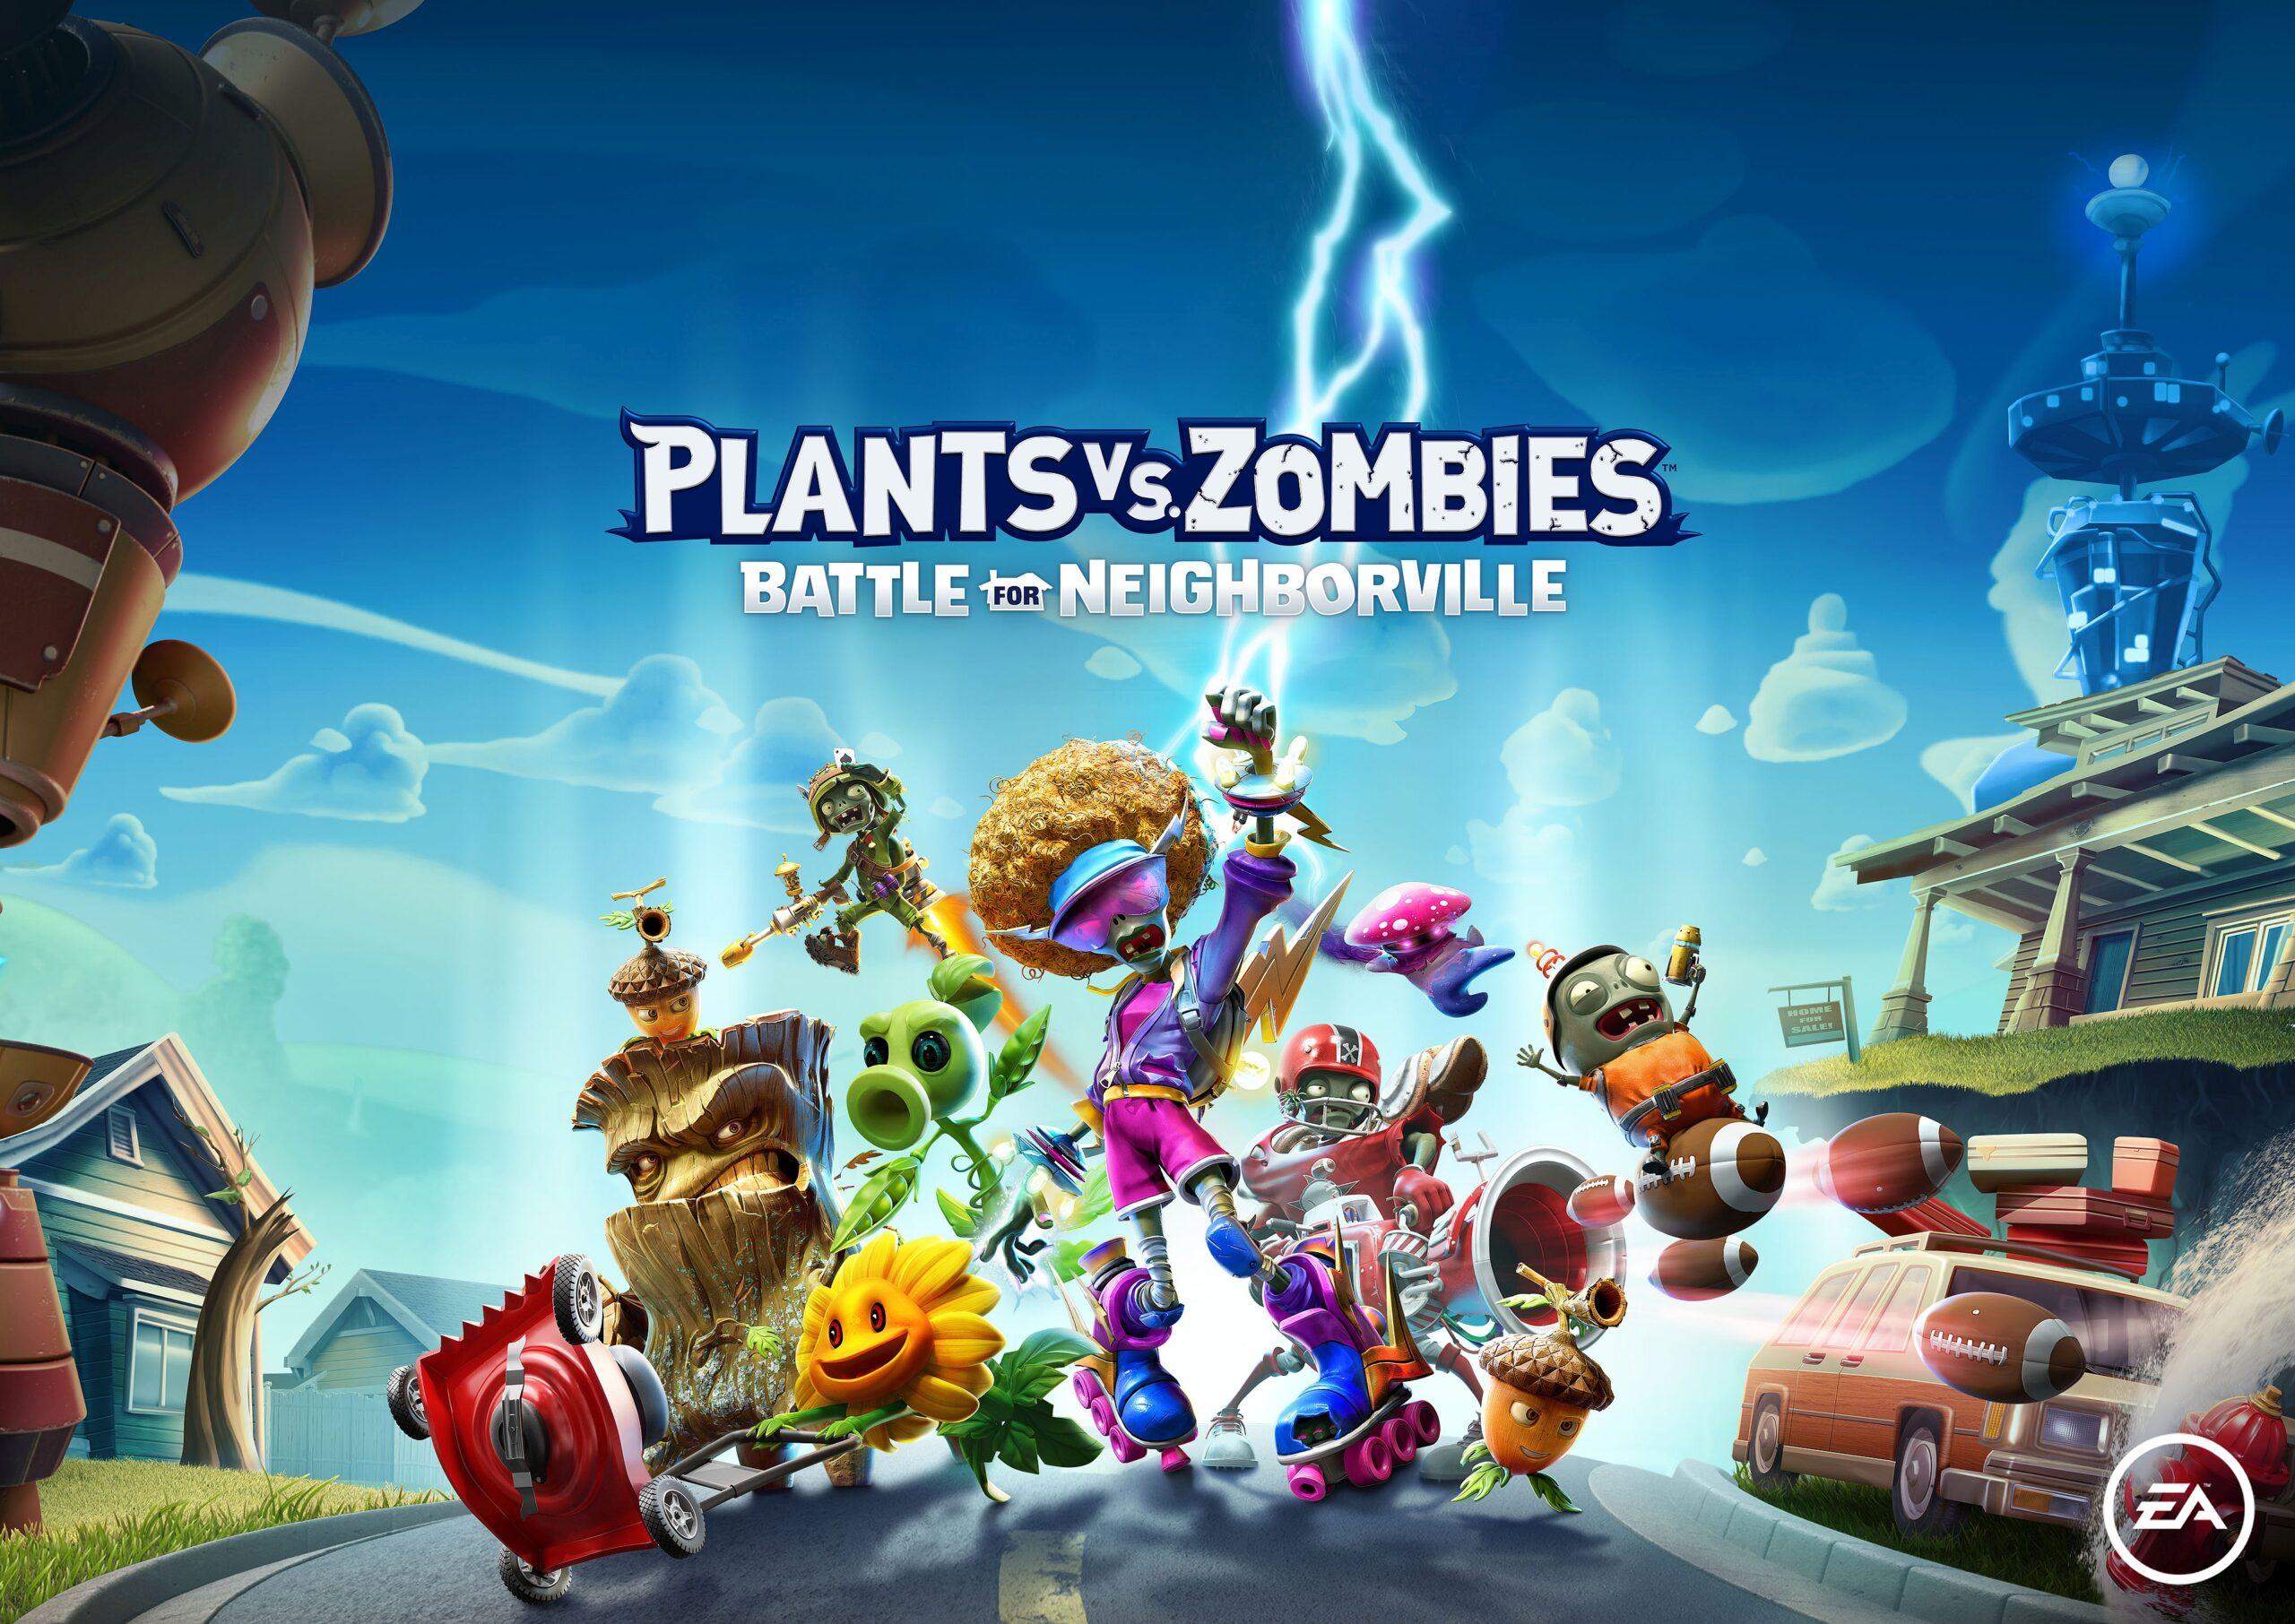 Plants vs Zombies Battle for Neighborville Announced Early